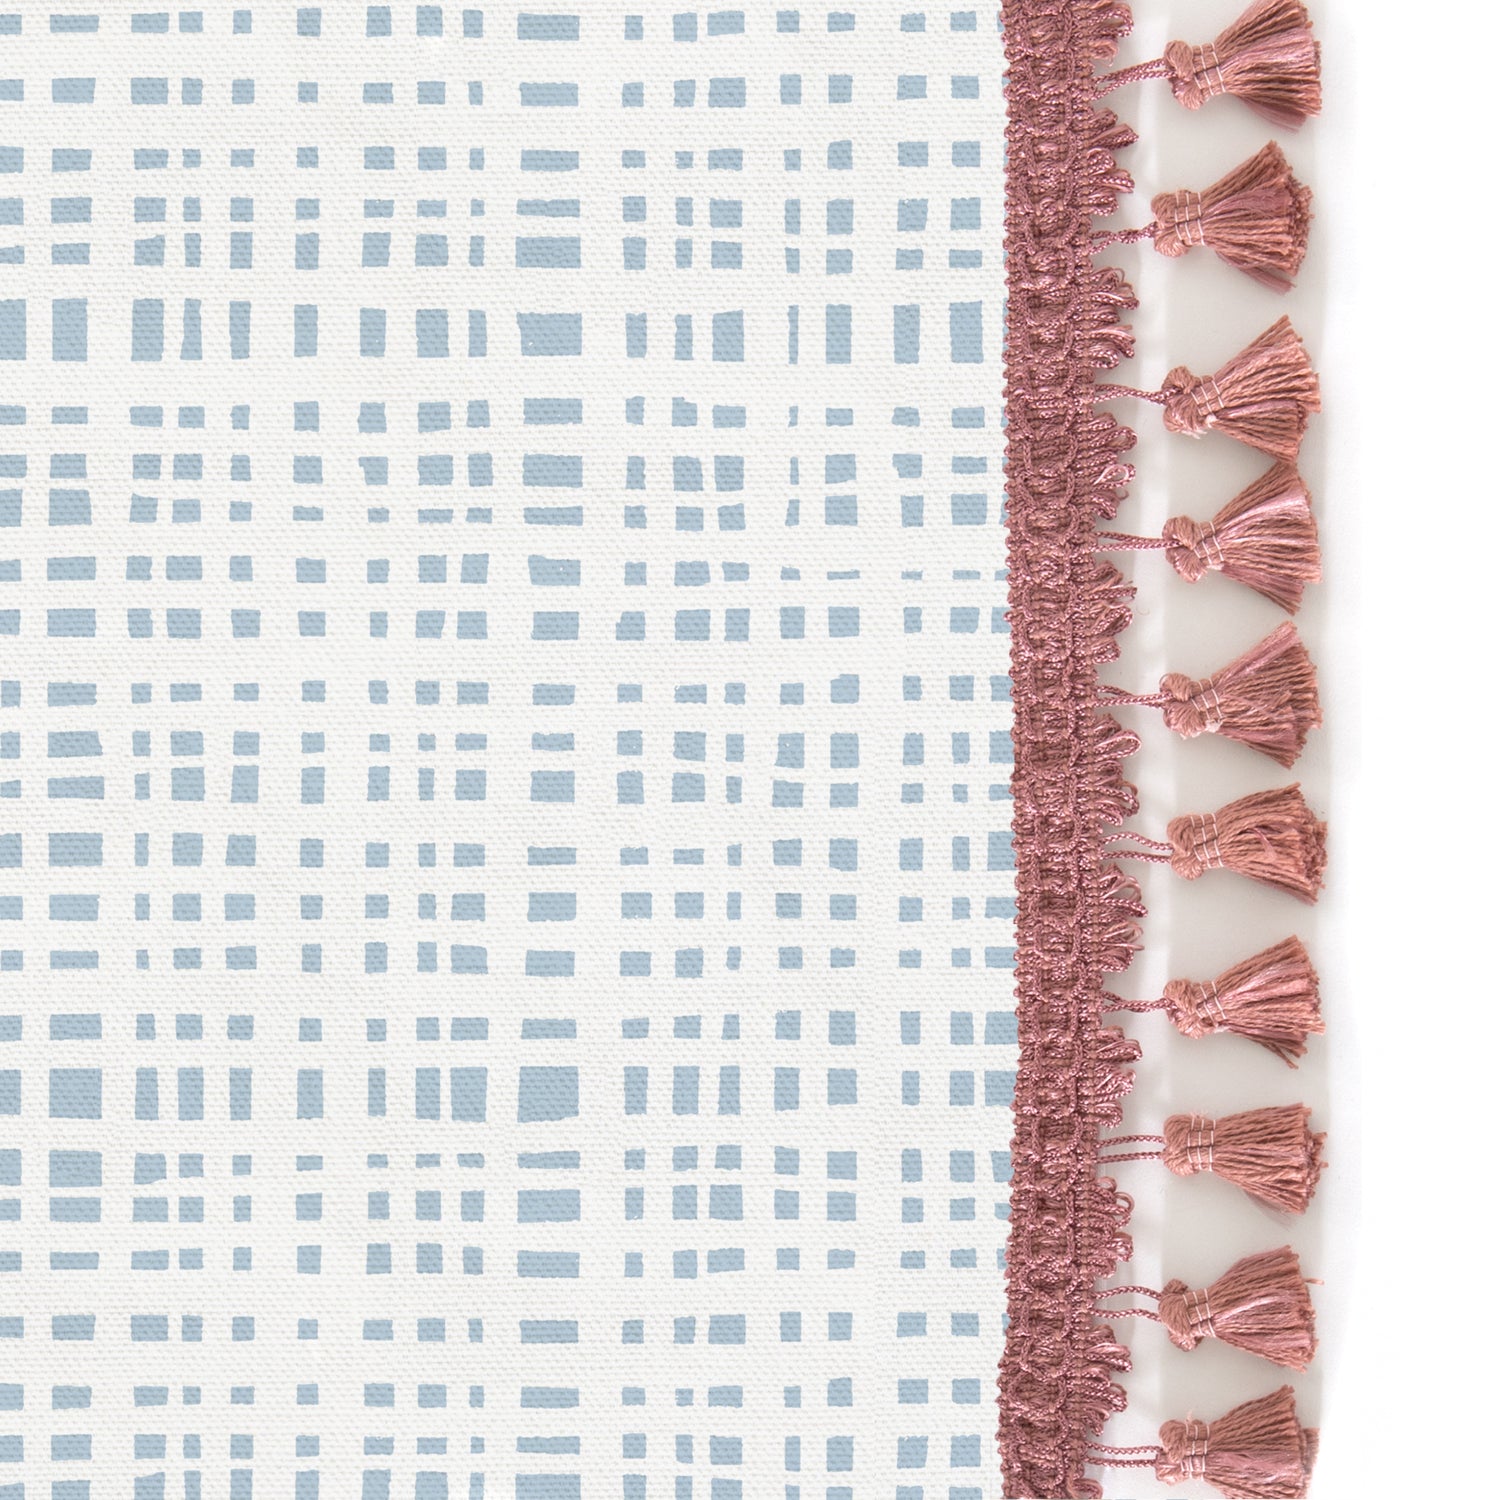 Upclose picture of Ginger Sky custom Sky Blue Ginghamshower curtain with dusty rose tassel trim